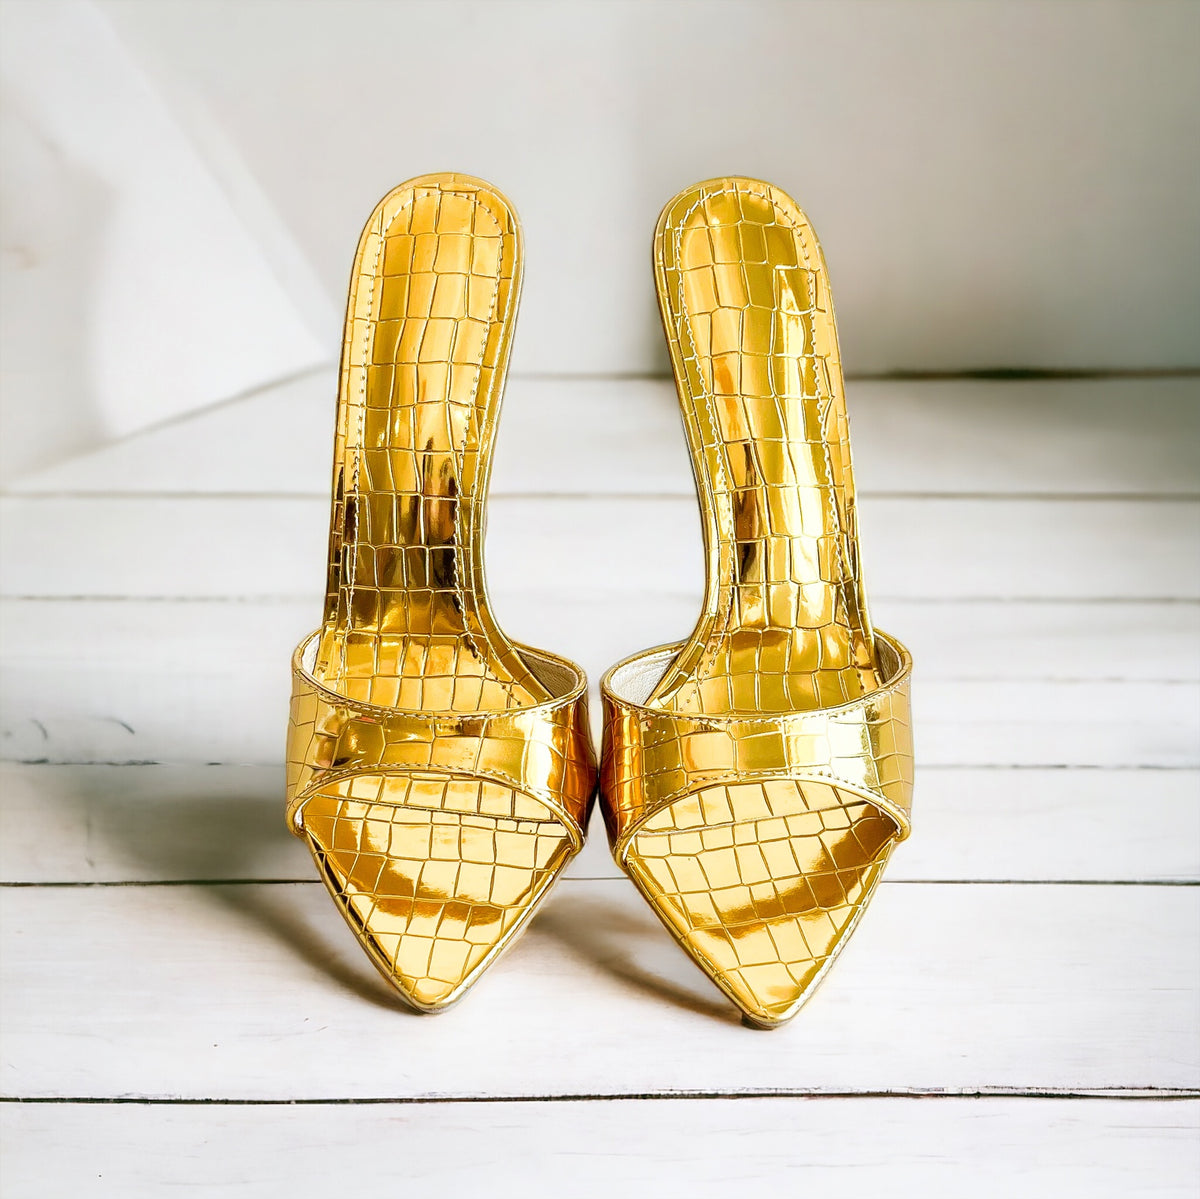 Metallic Reptile Stiletto Mule Sandals-Gold-250 Shoes-Darling-Coastal Bloom Boutique, find the trendiest versions of the popular styles and looks Located in Indialantic, FL